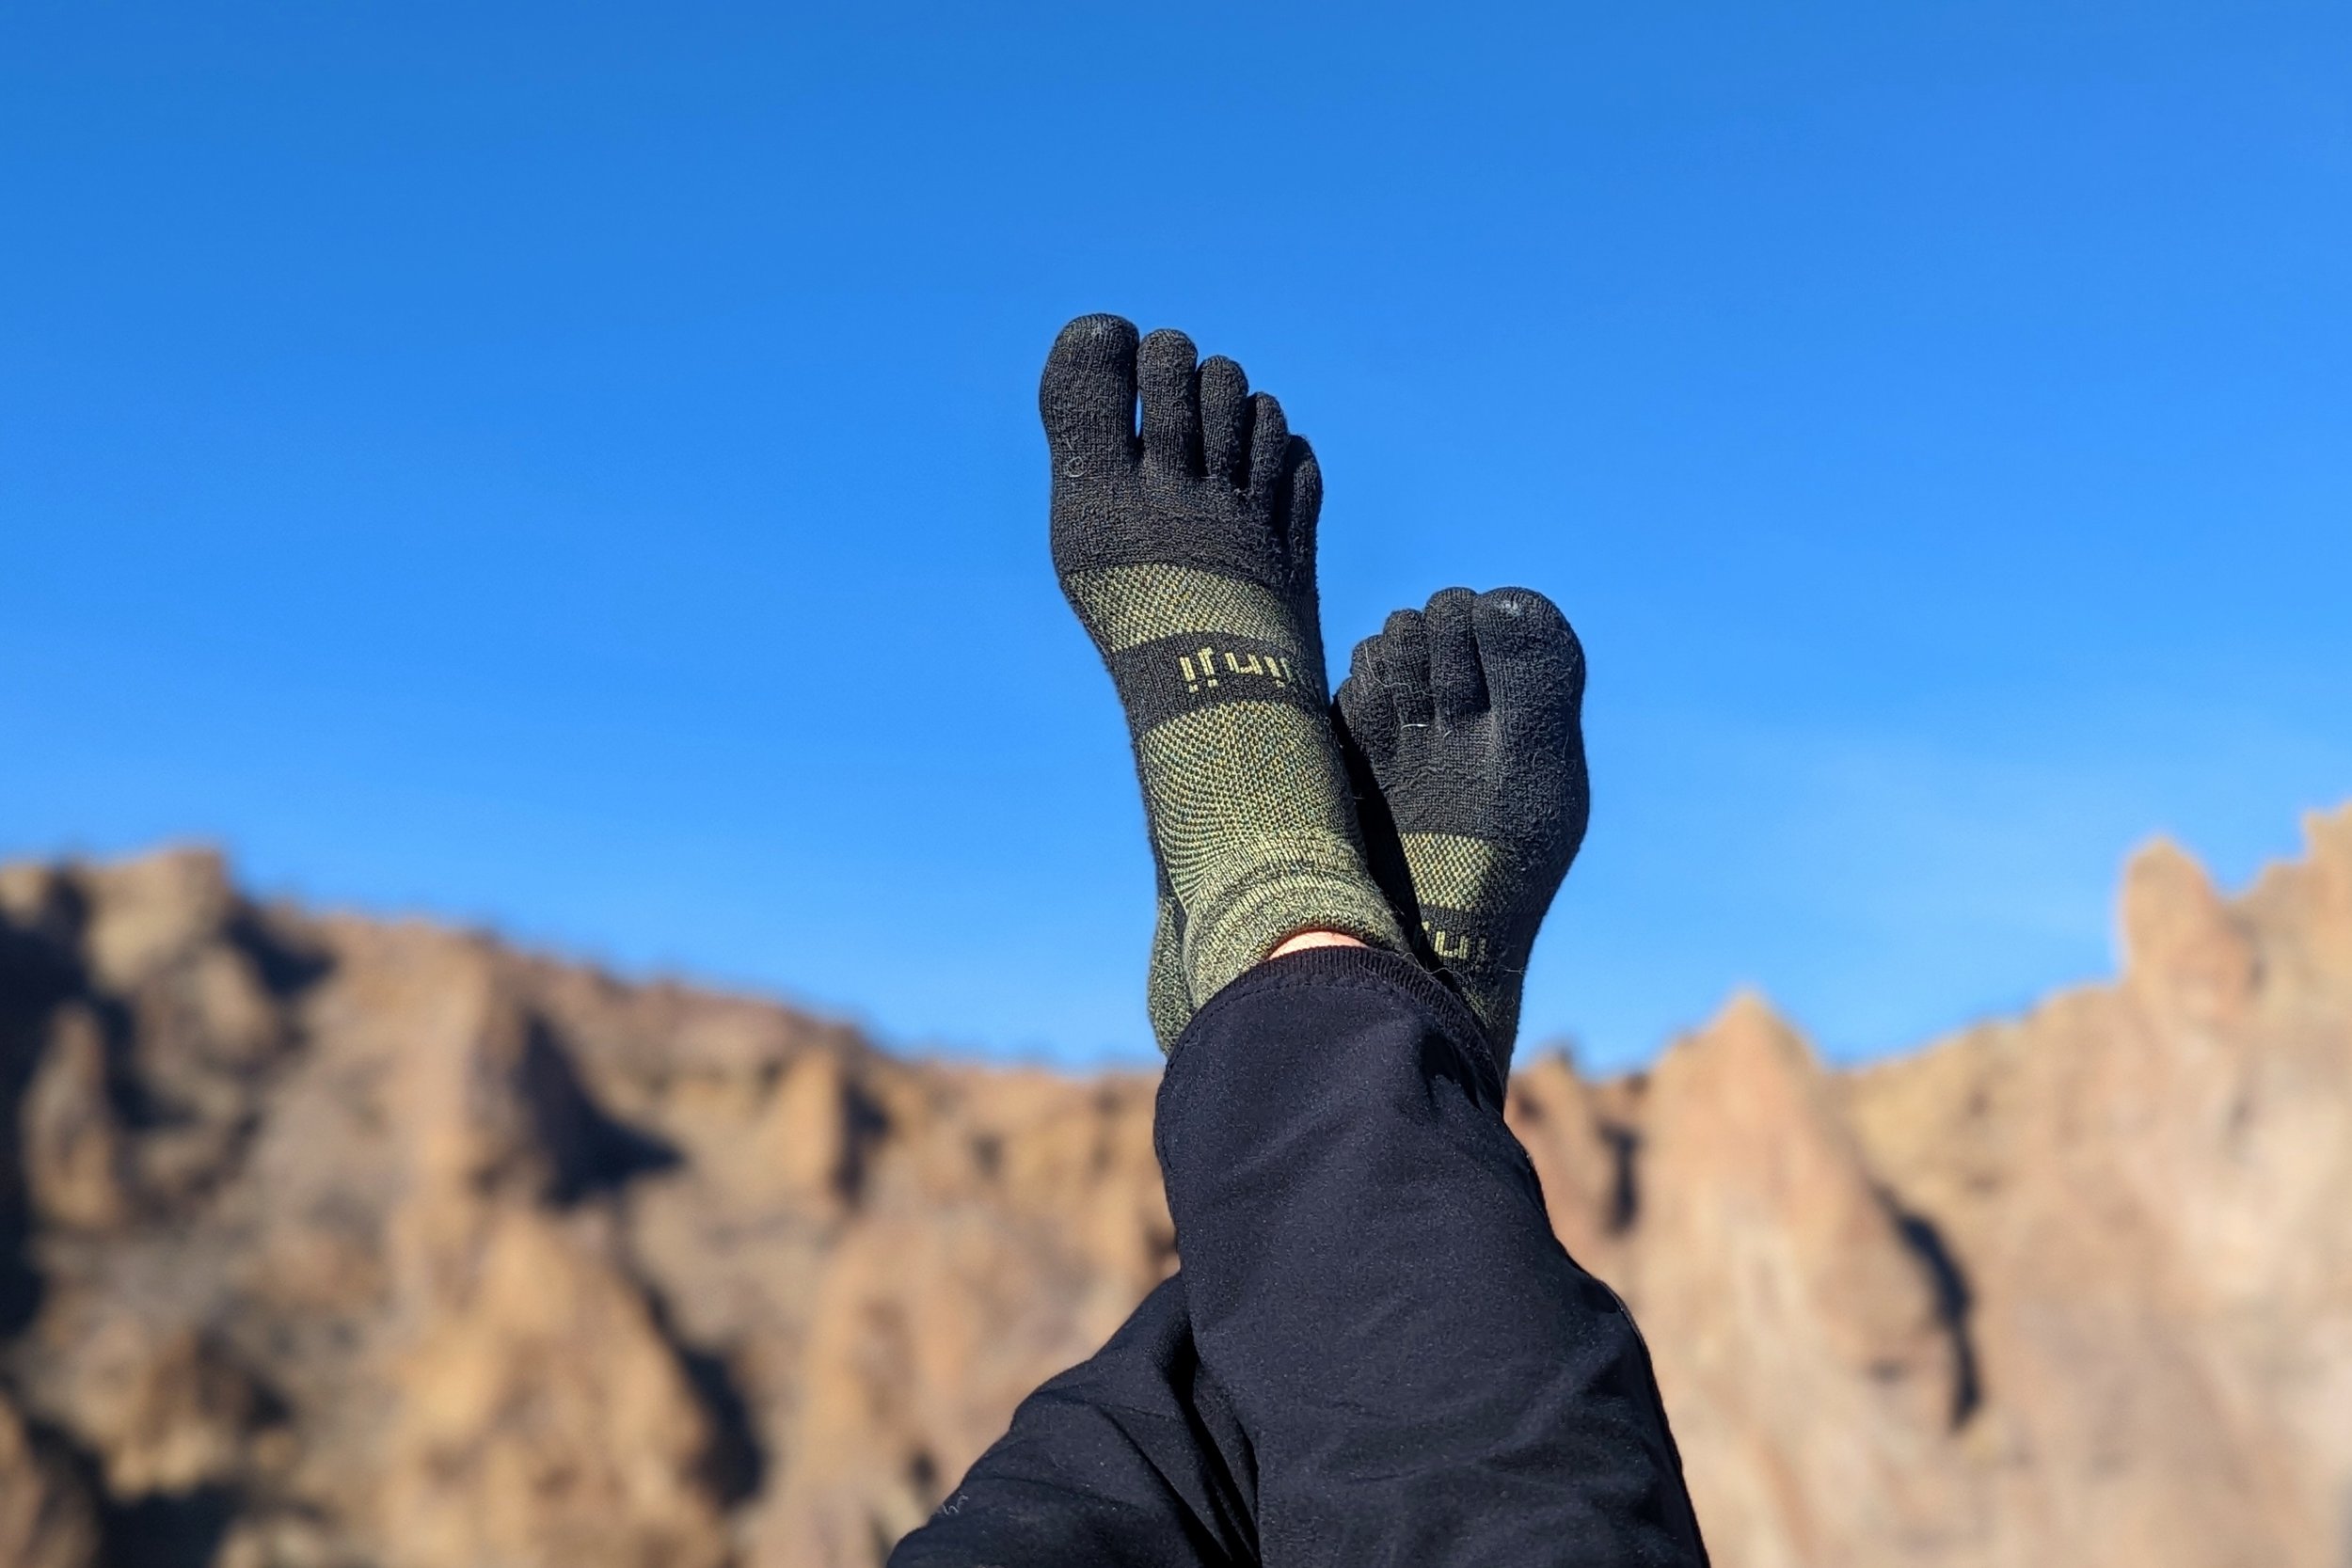 Photo of a person's feet with socks on a background of sky and a mountain range. The socks are toe socks